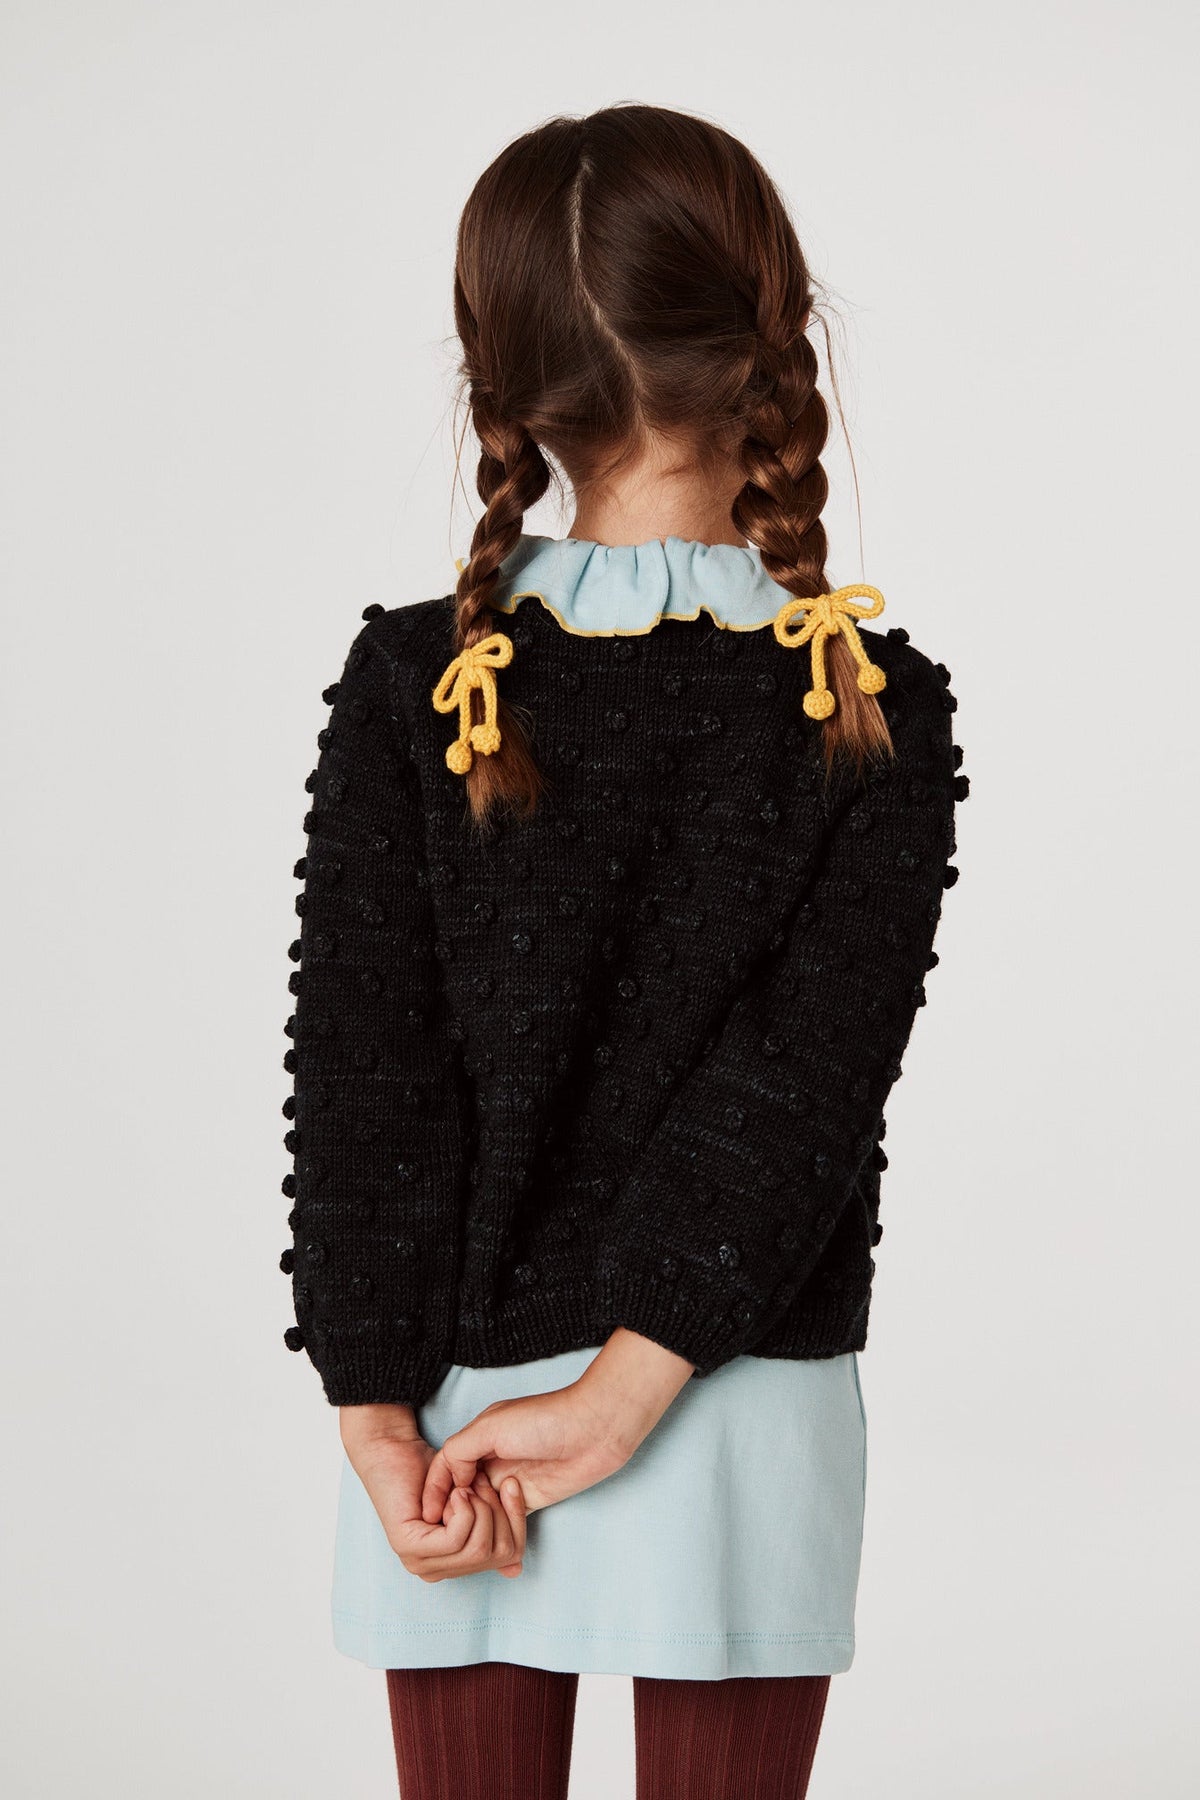 Popcorn Cardigan - Carbon+Model is 48 inches tall, 47lbs, wearing a size 4-5y